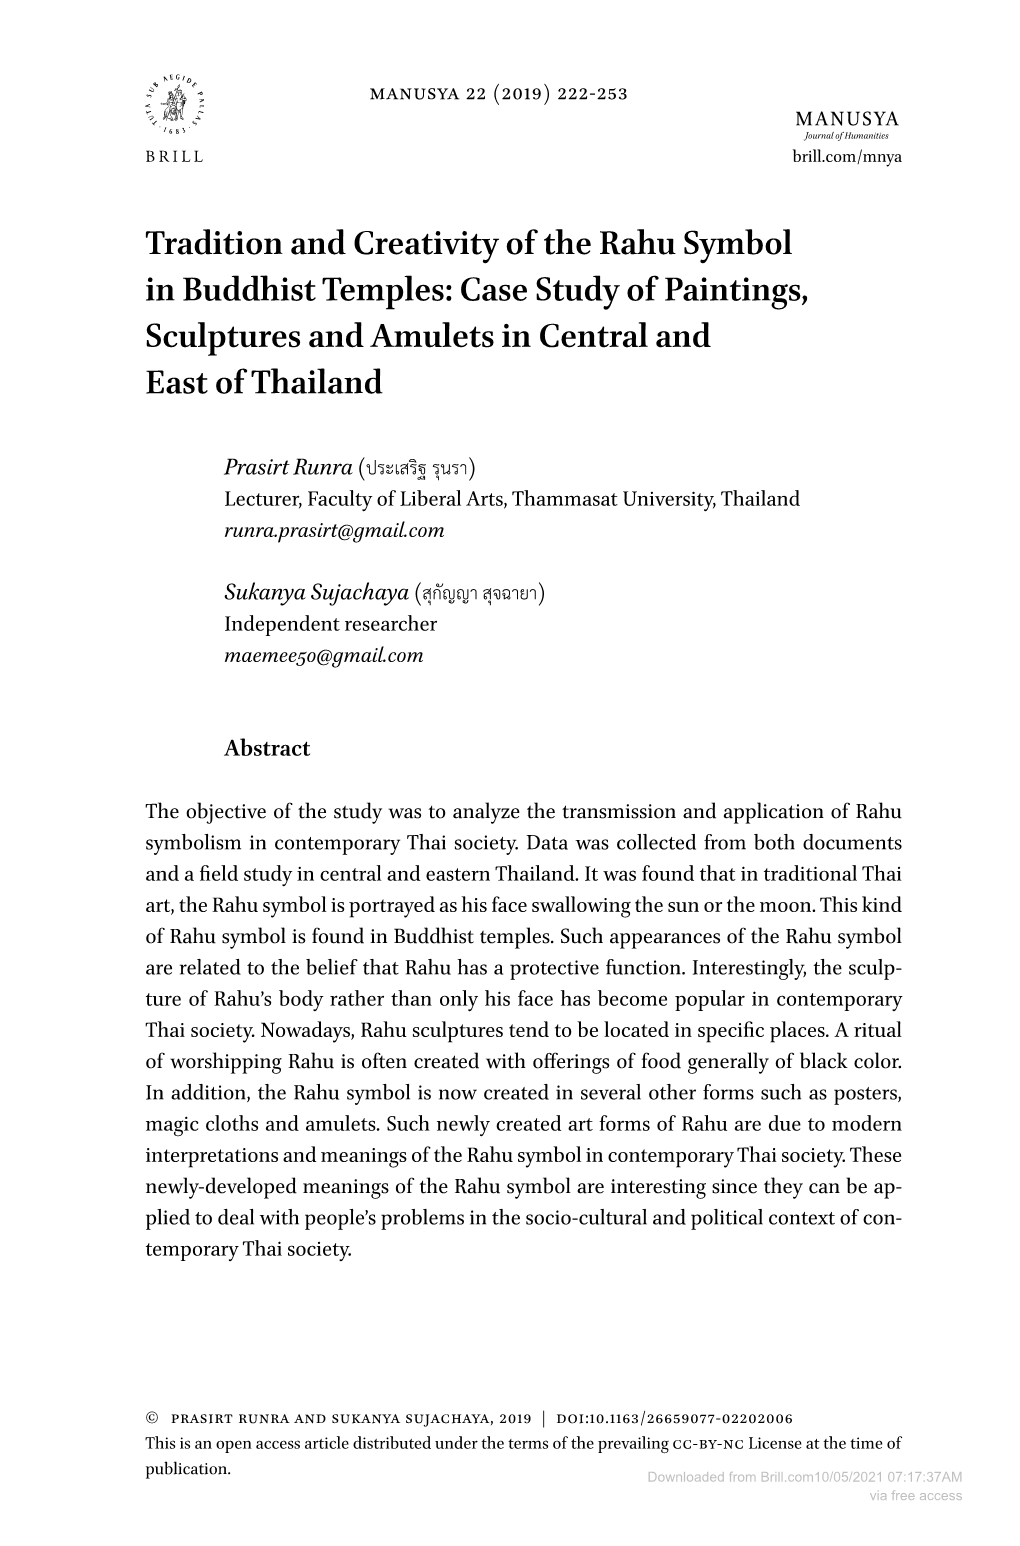 Tradition and Creativity of the Rahu Symbol in Buddhist Temples: Case Study of Paintings, Sculptures and Amulets in Central and East of Thailand